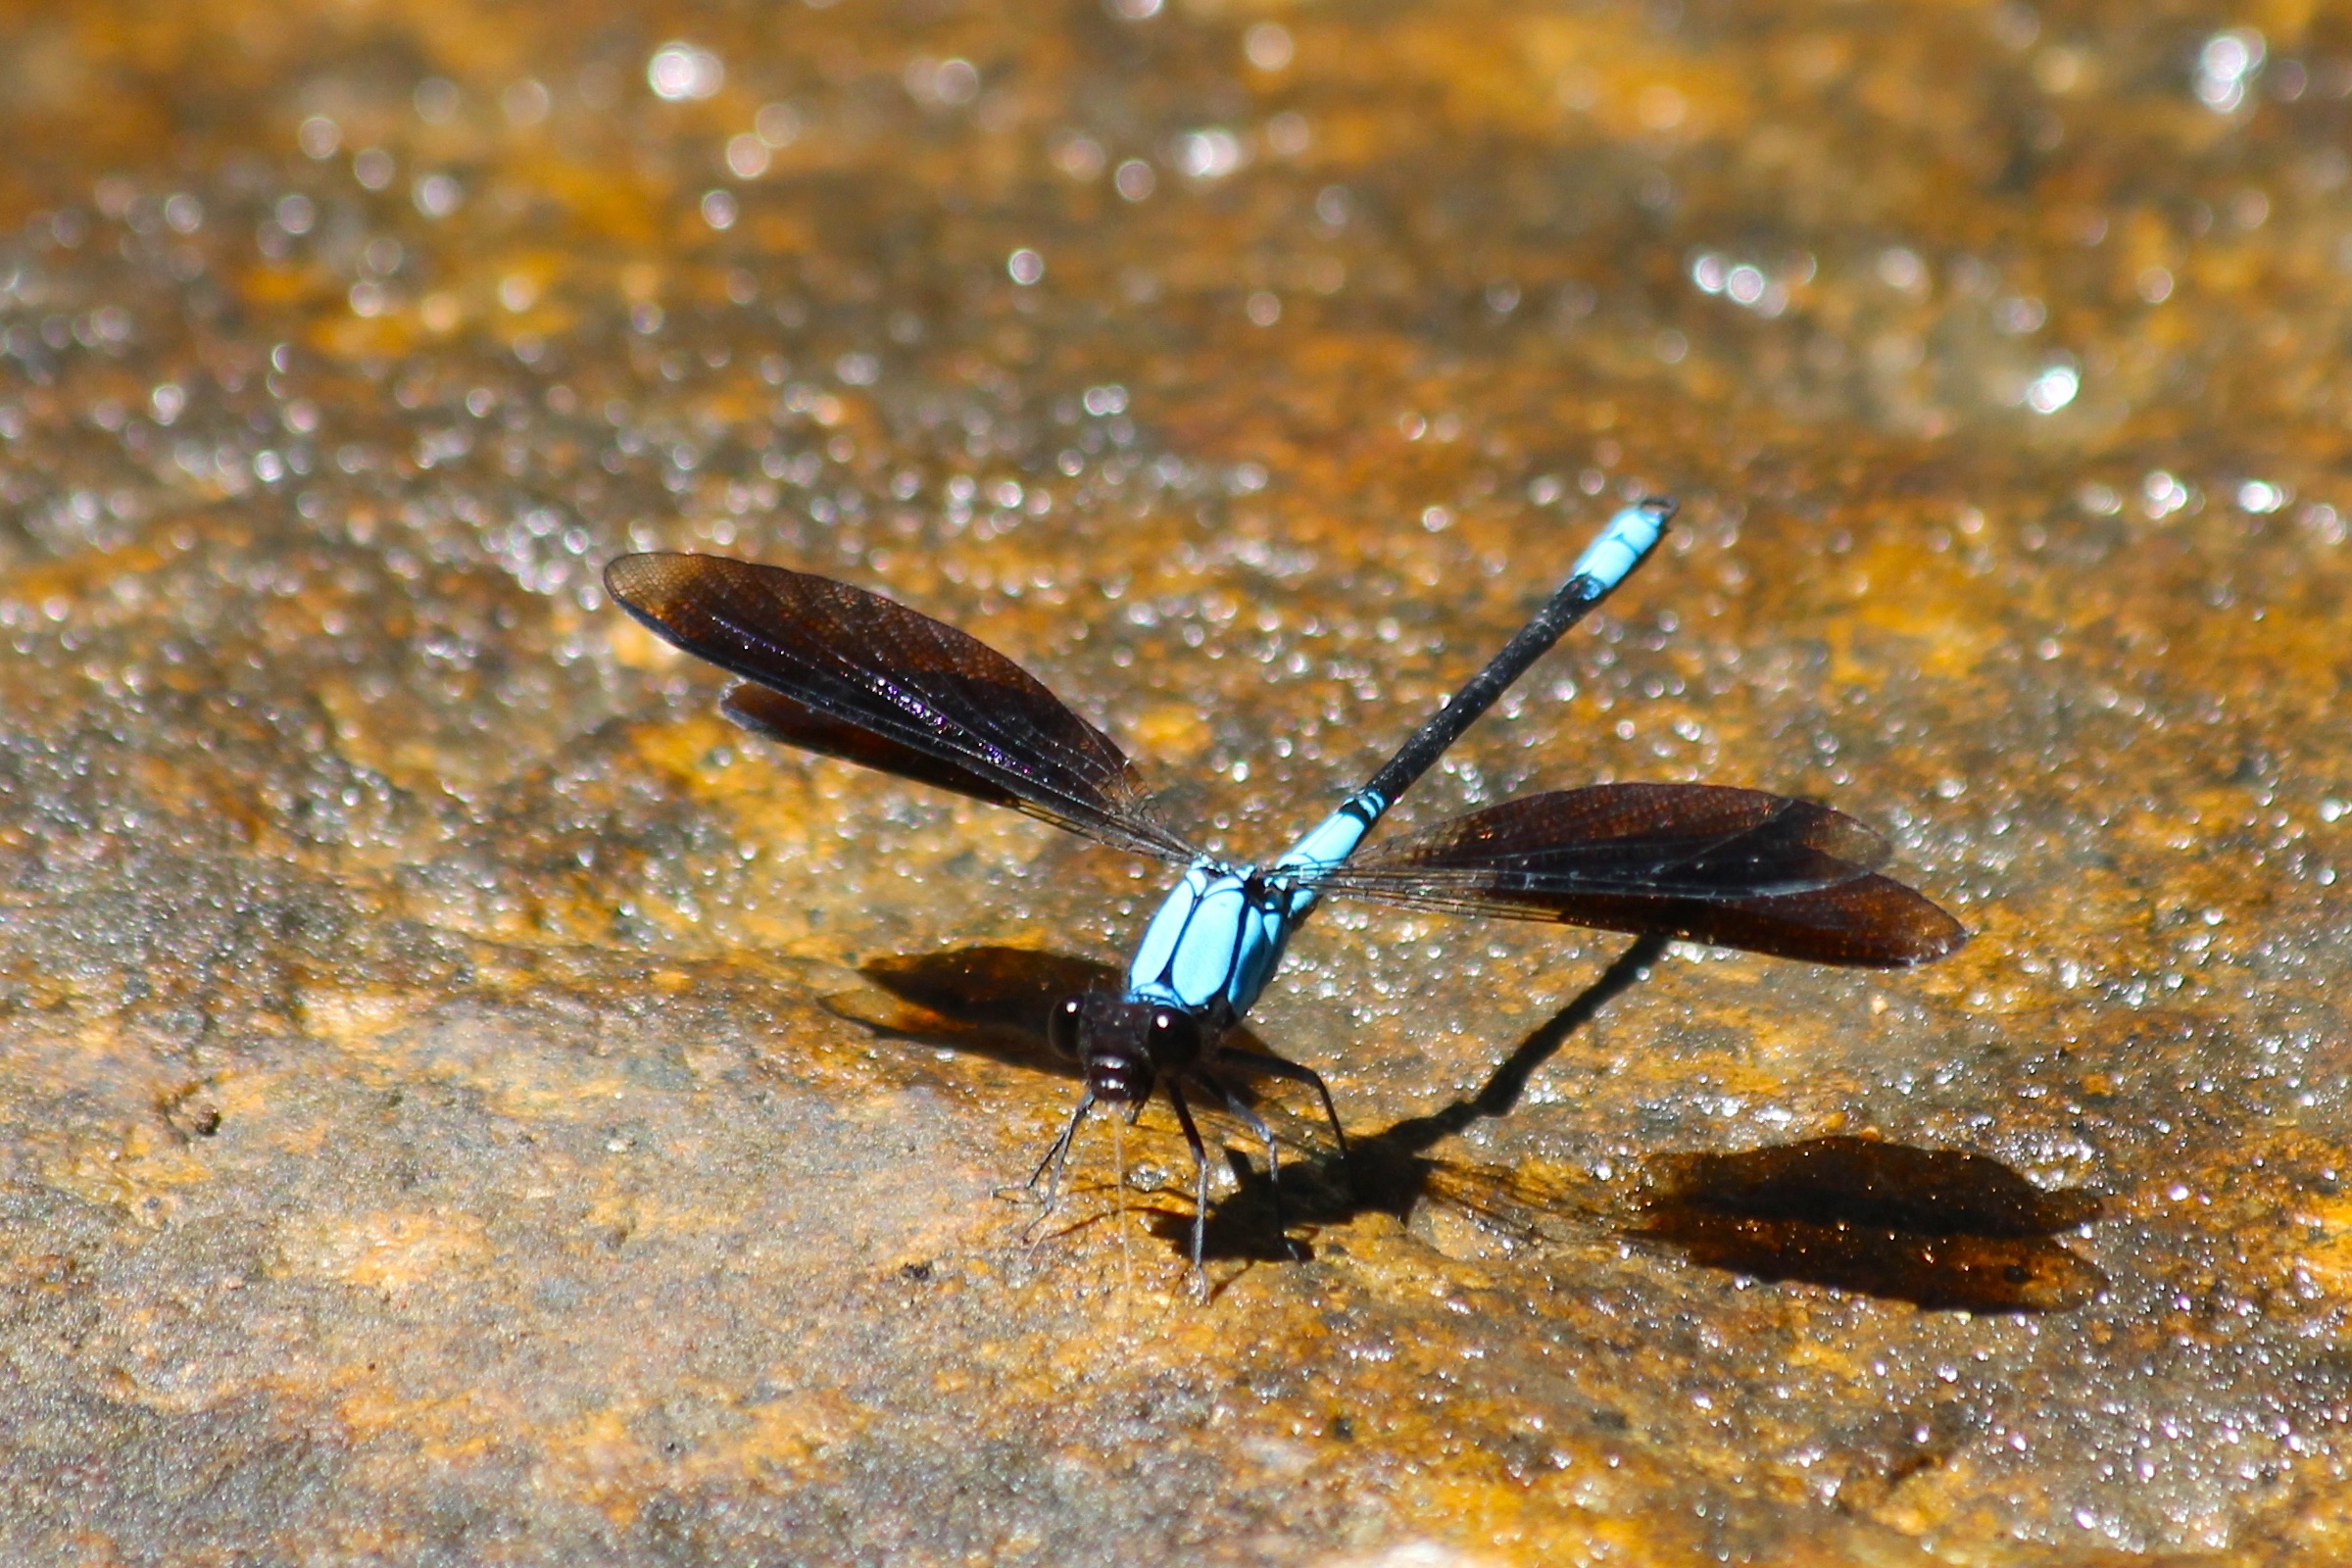 brilliant colours of the damselfly, Tropical Rockmaster. Photograph Malcolm Tattersall.